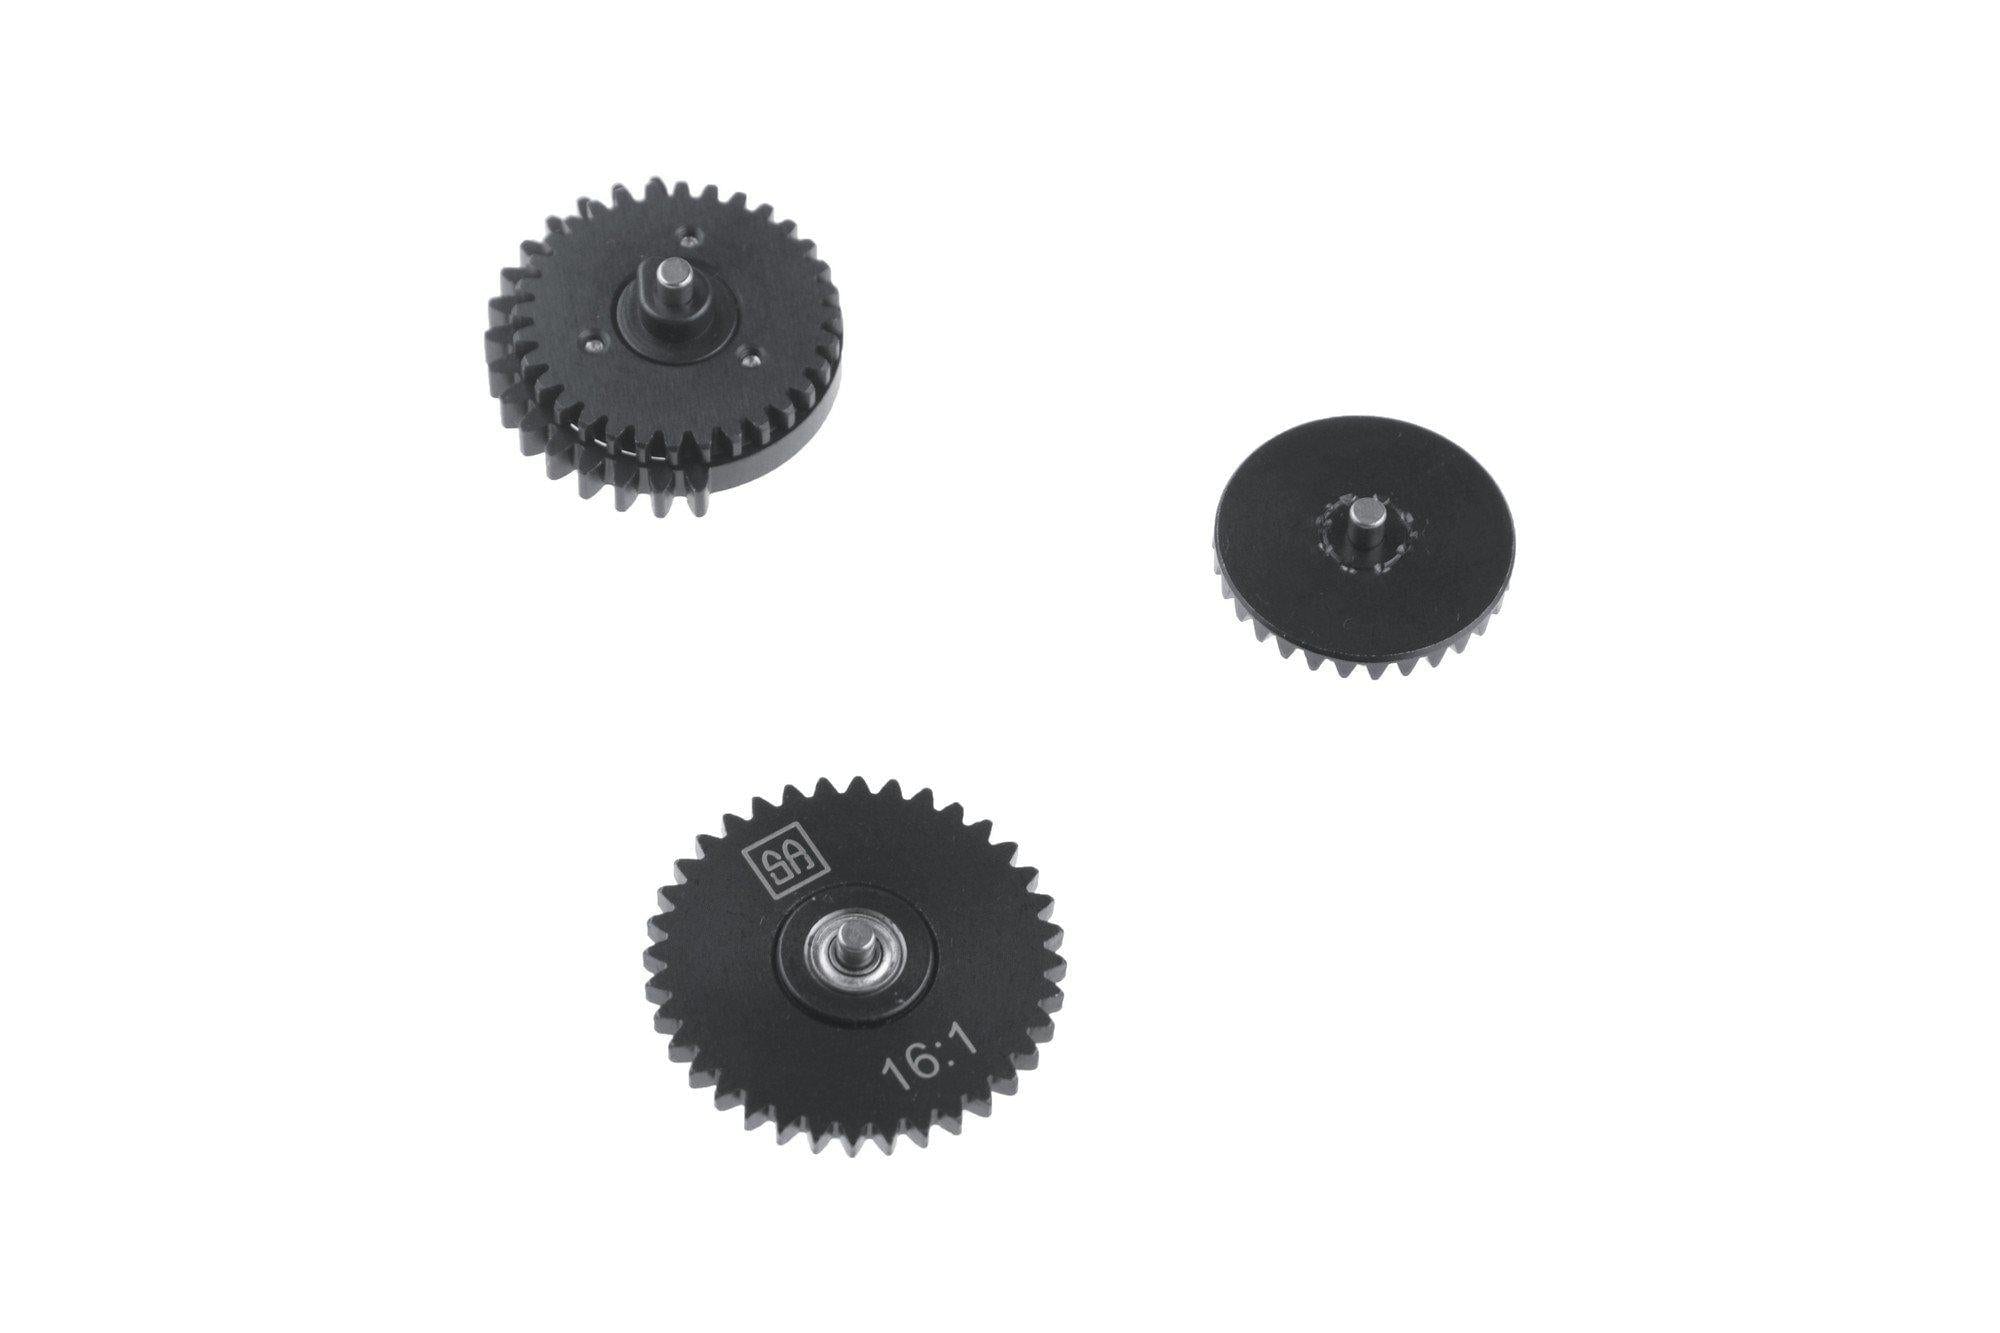 A set of steel gears CNC 16_1 by Specna Arms on Airsoft Mania Europe